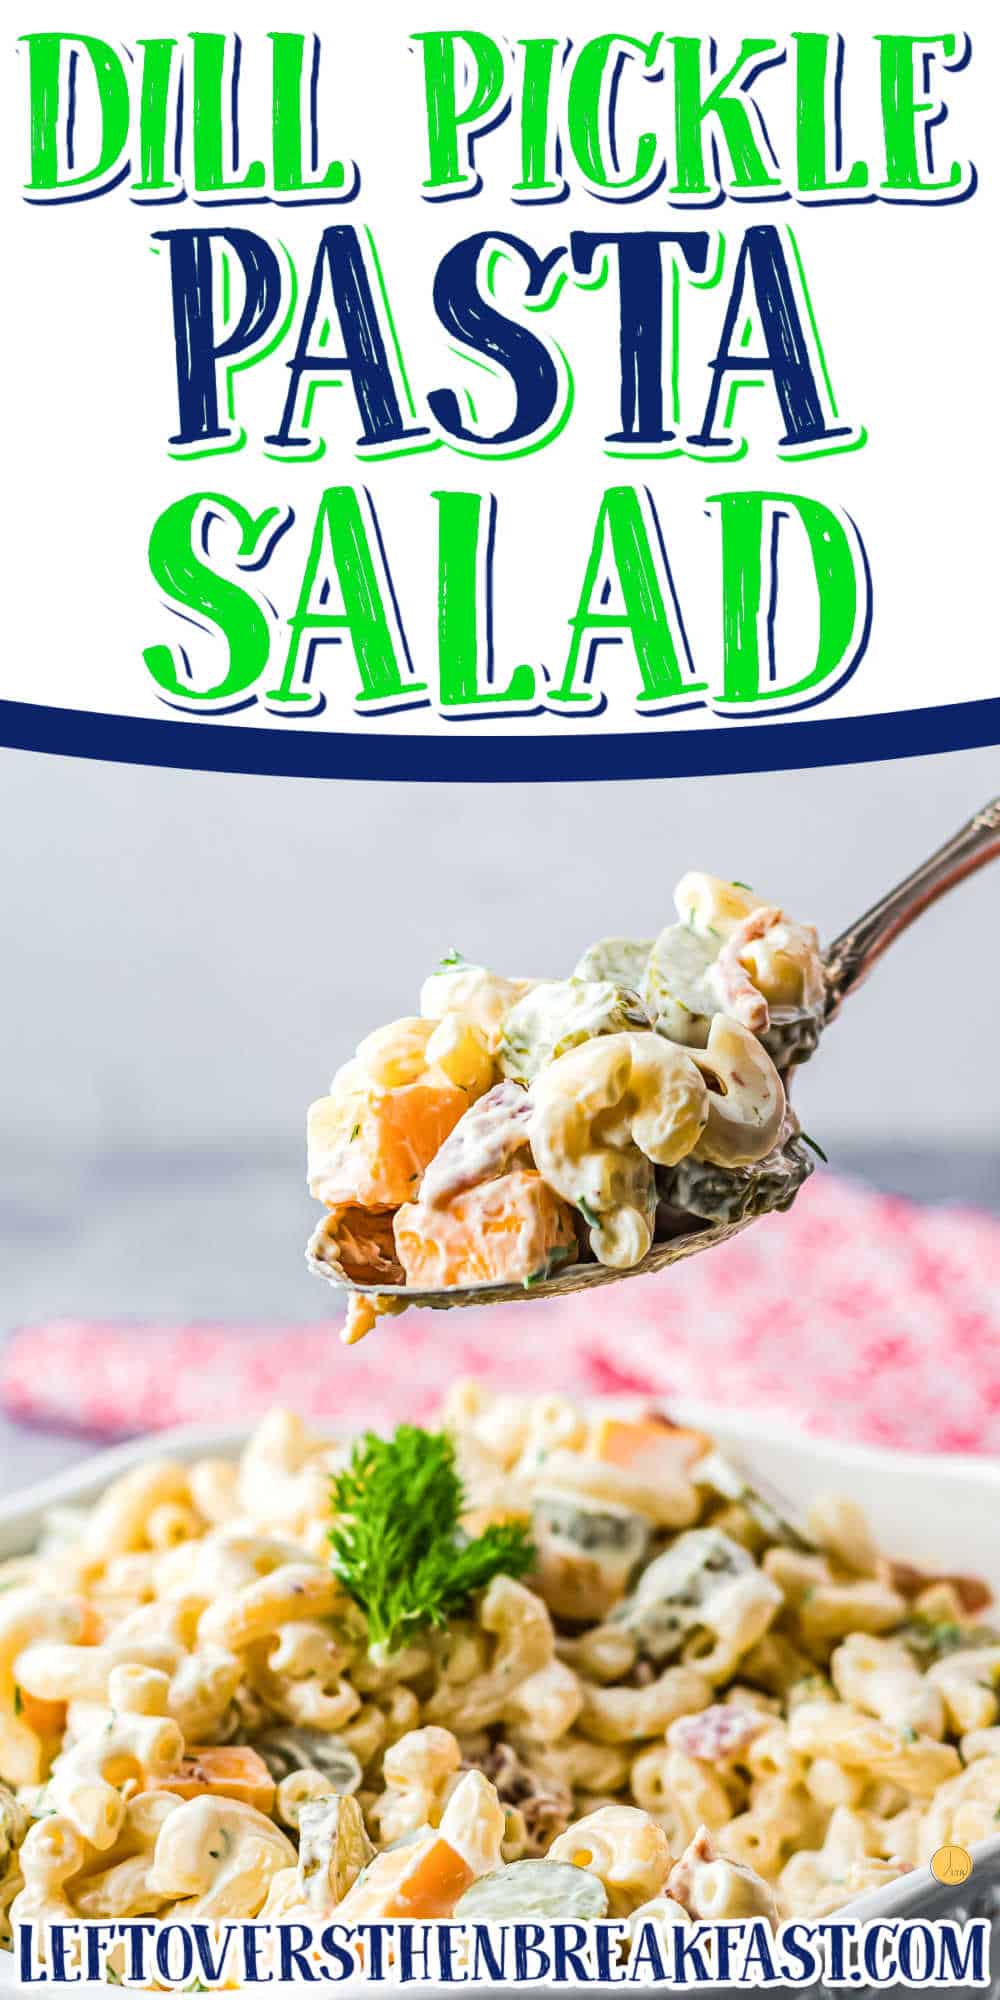 scoop of dill pickle salad with text "dill pickle pasta salad"